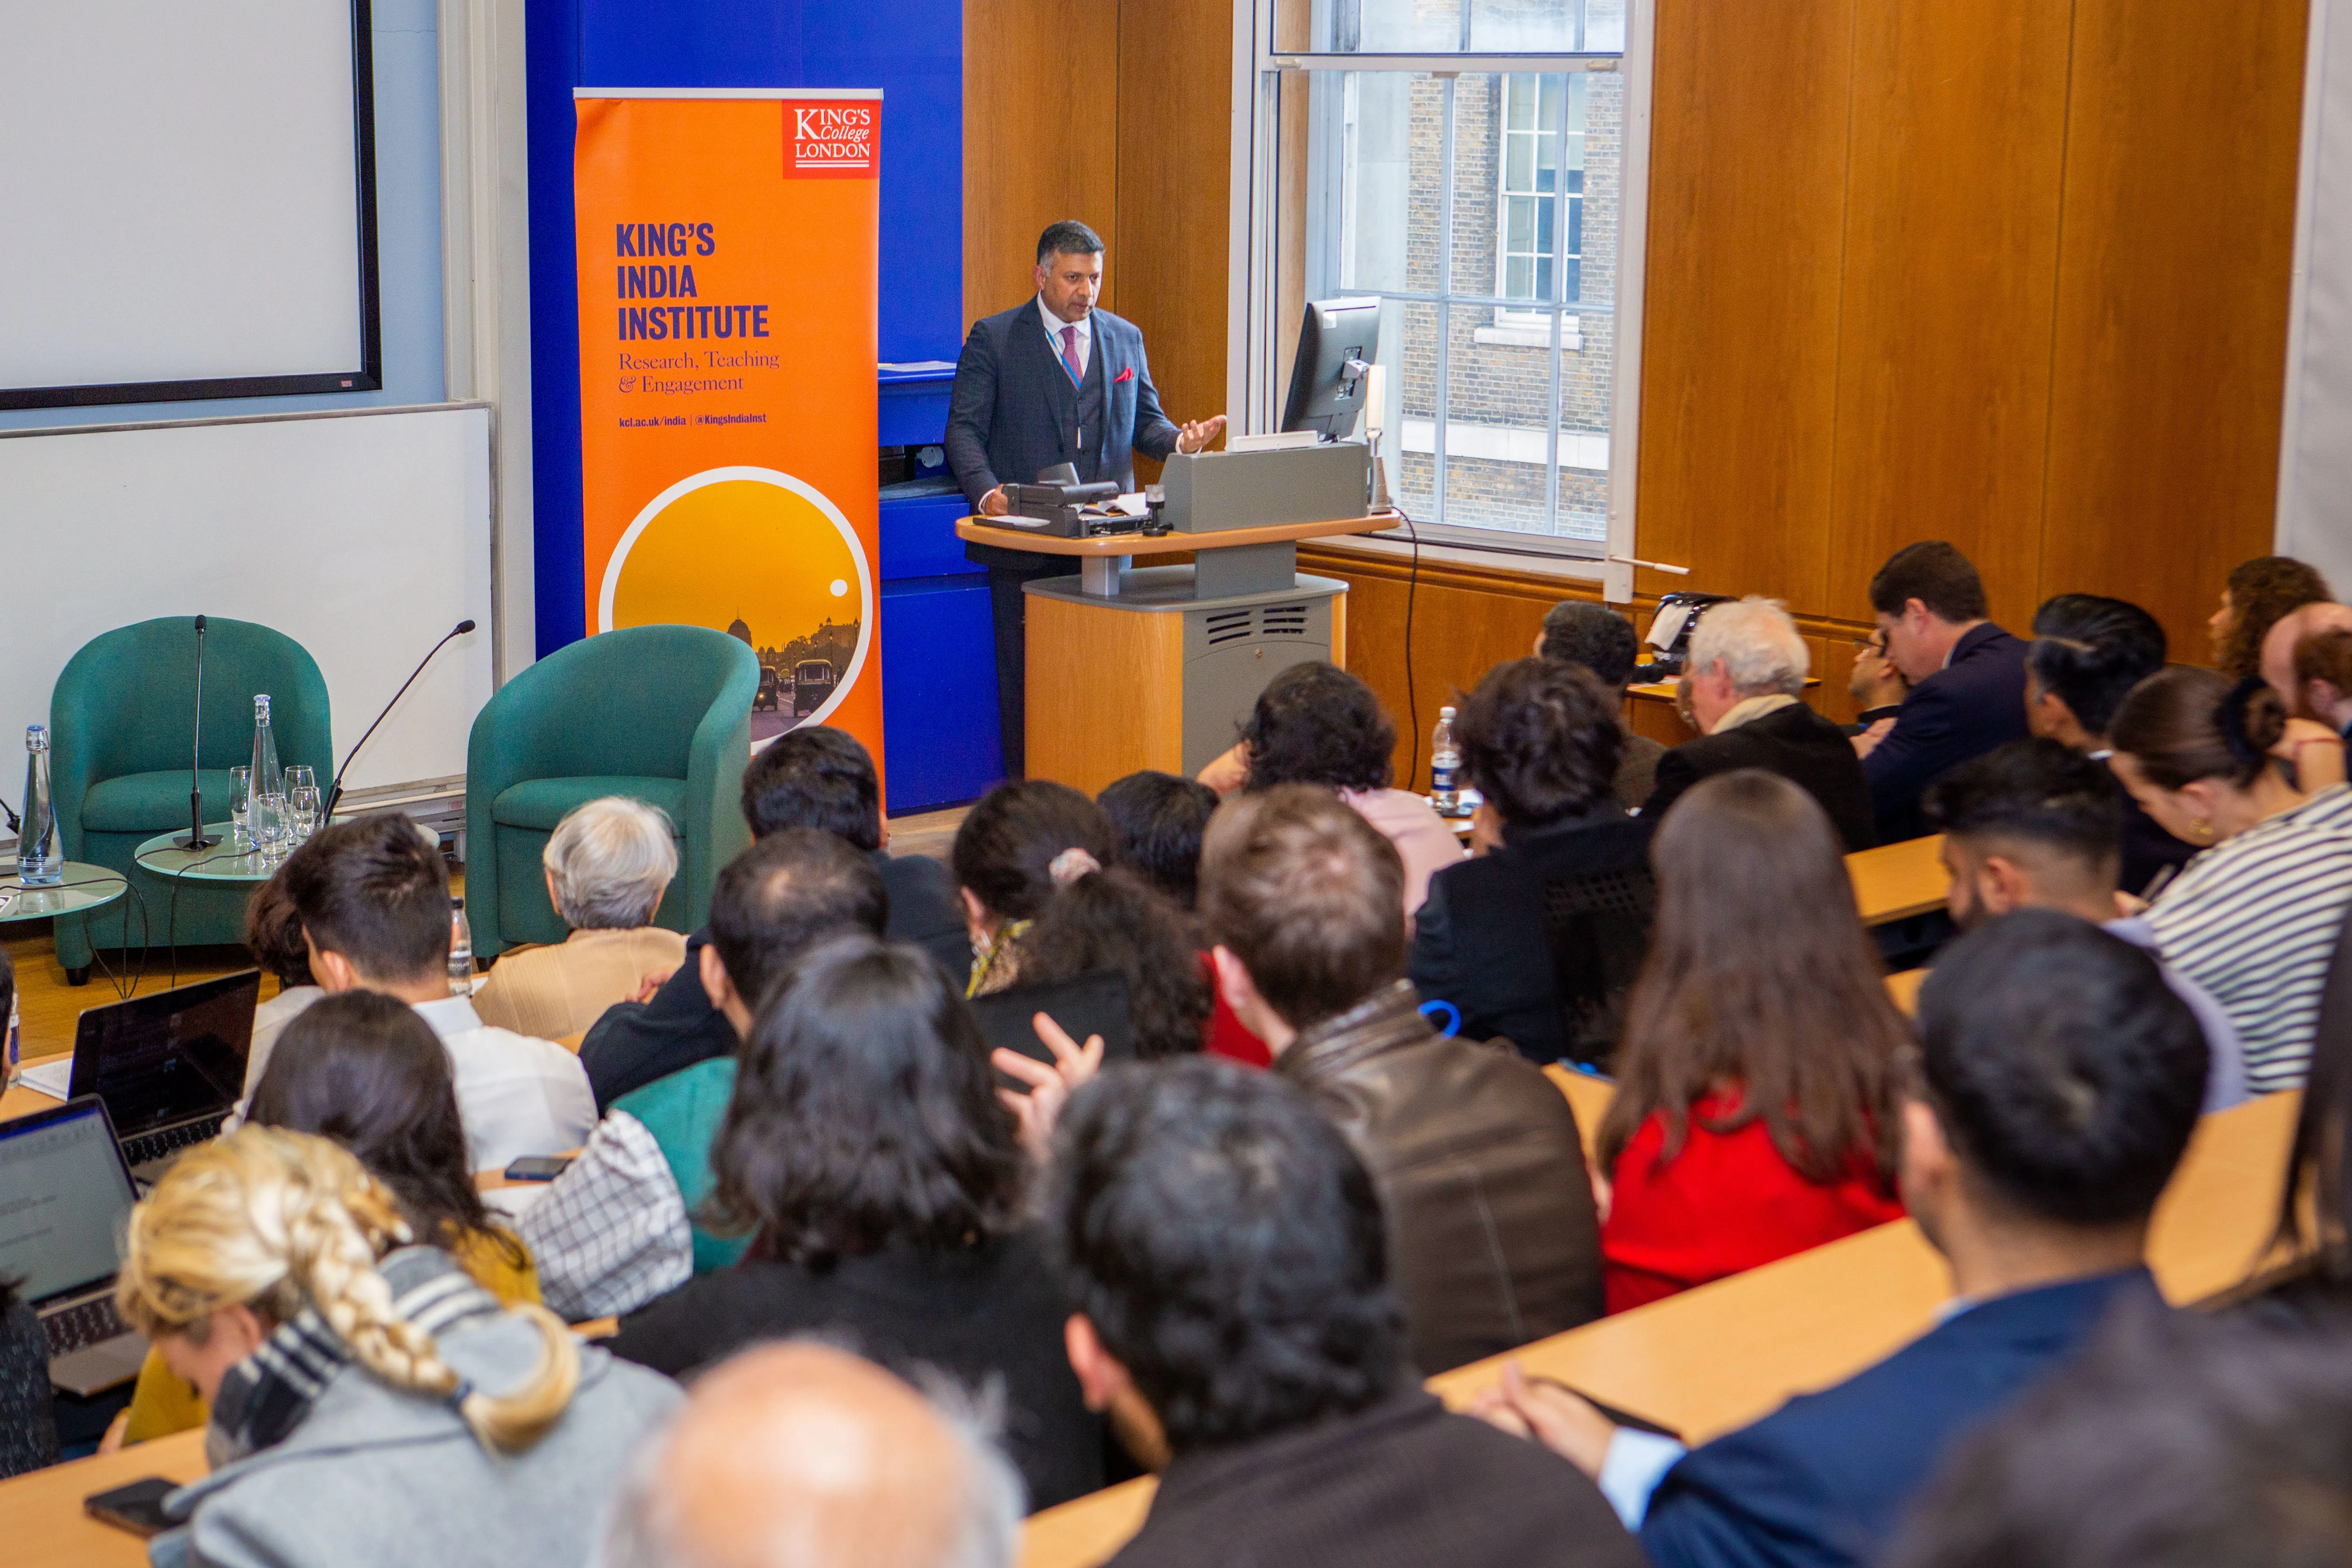 Audience at King's listening to the lecture by India's High Commissioner to the UK Vikram Doraiswami